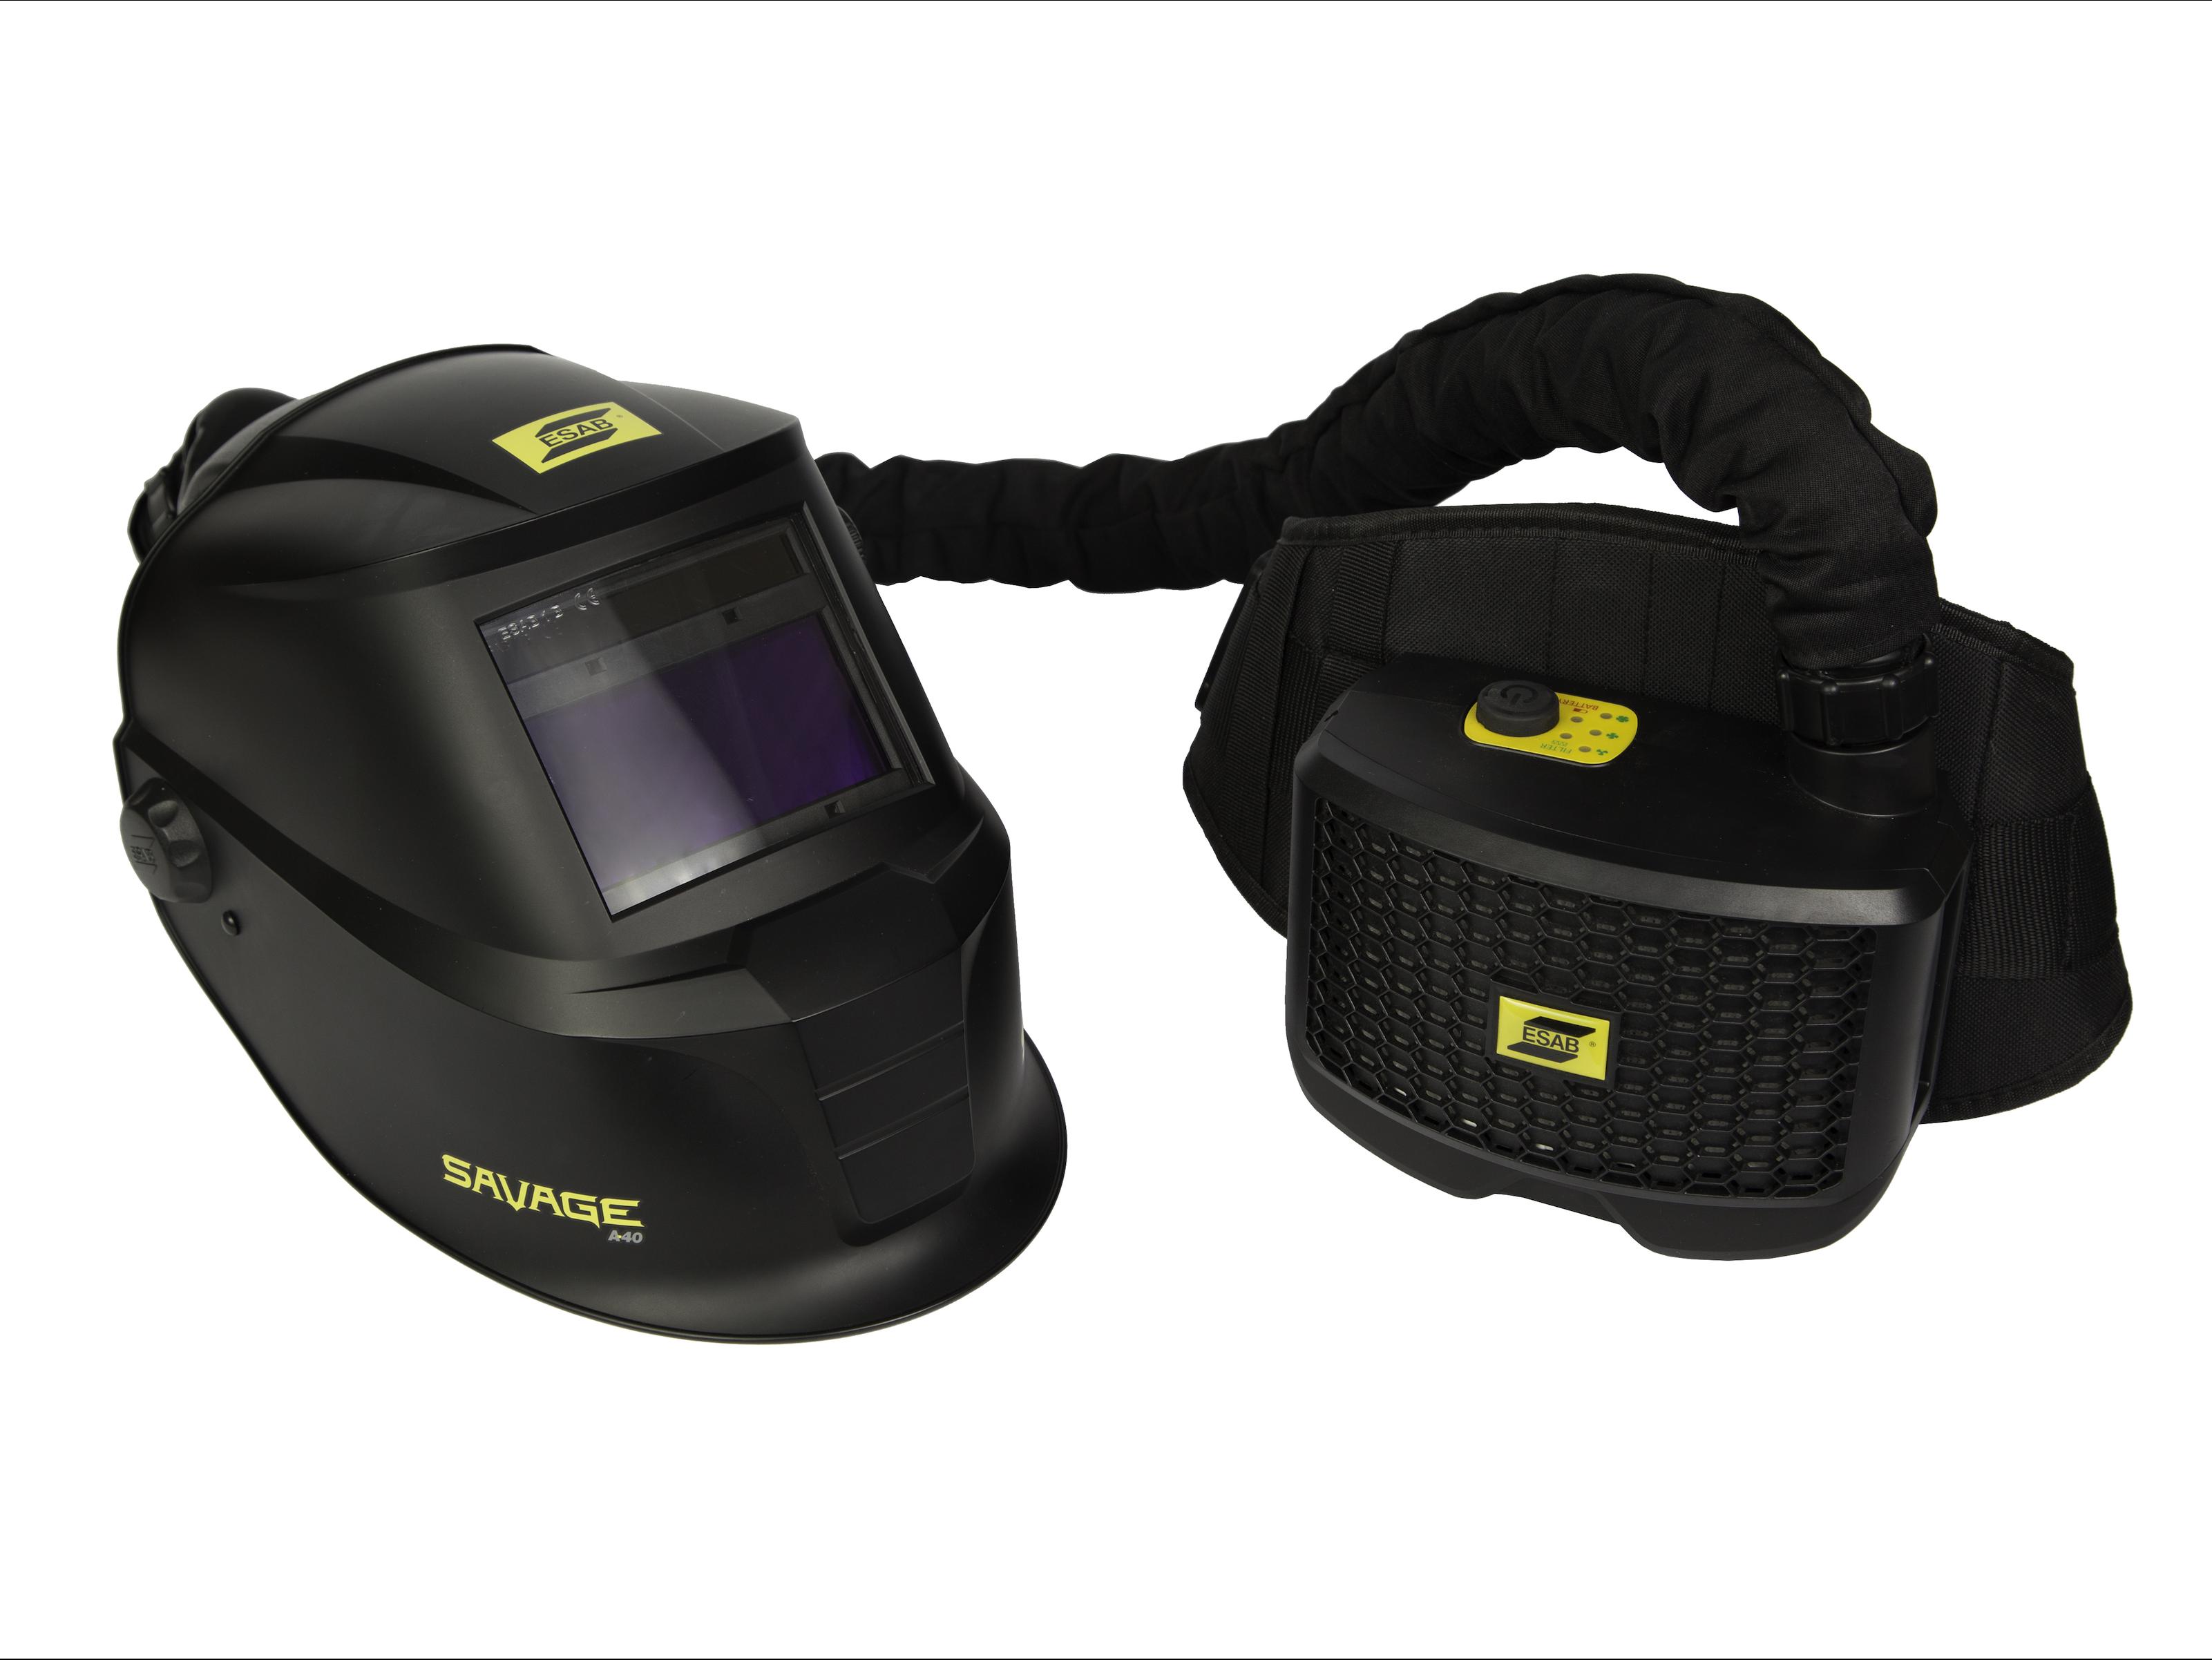 Heavy-duty protection from welding fumes and particulates